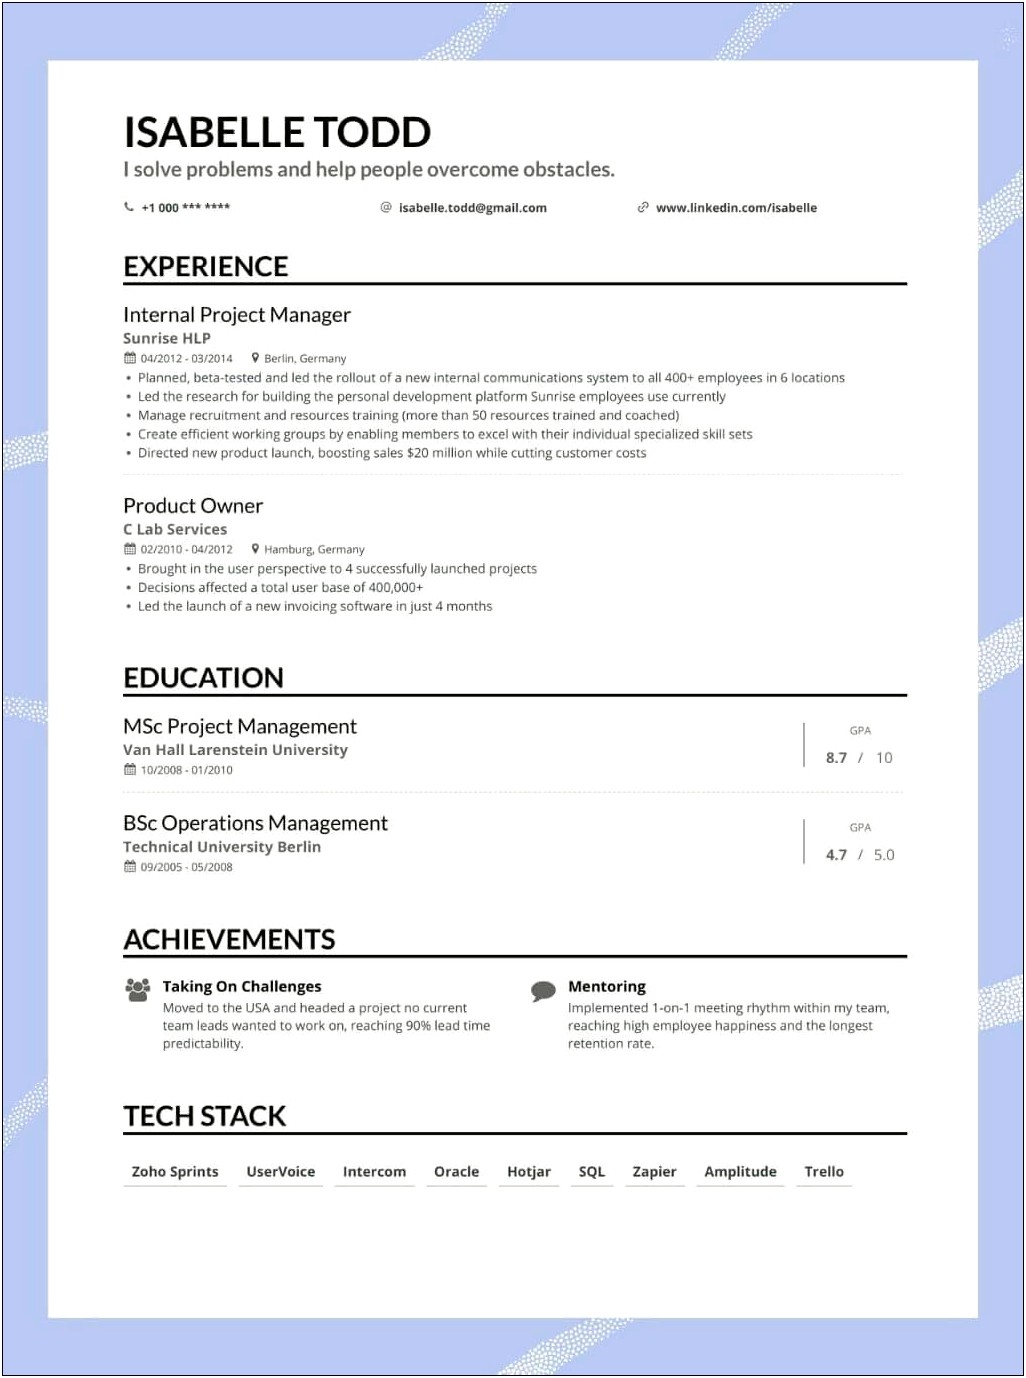 Resume Should I Include Work Experience Date